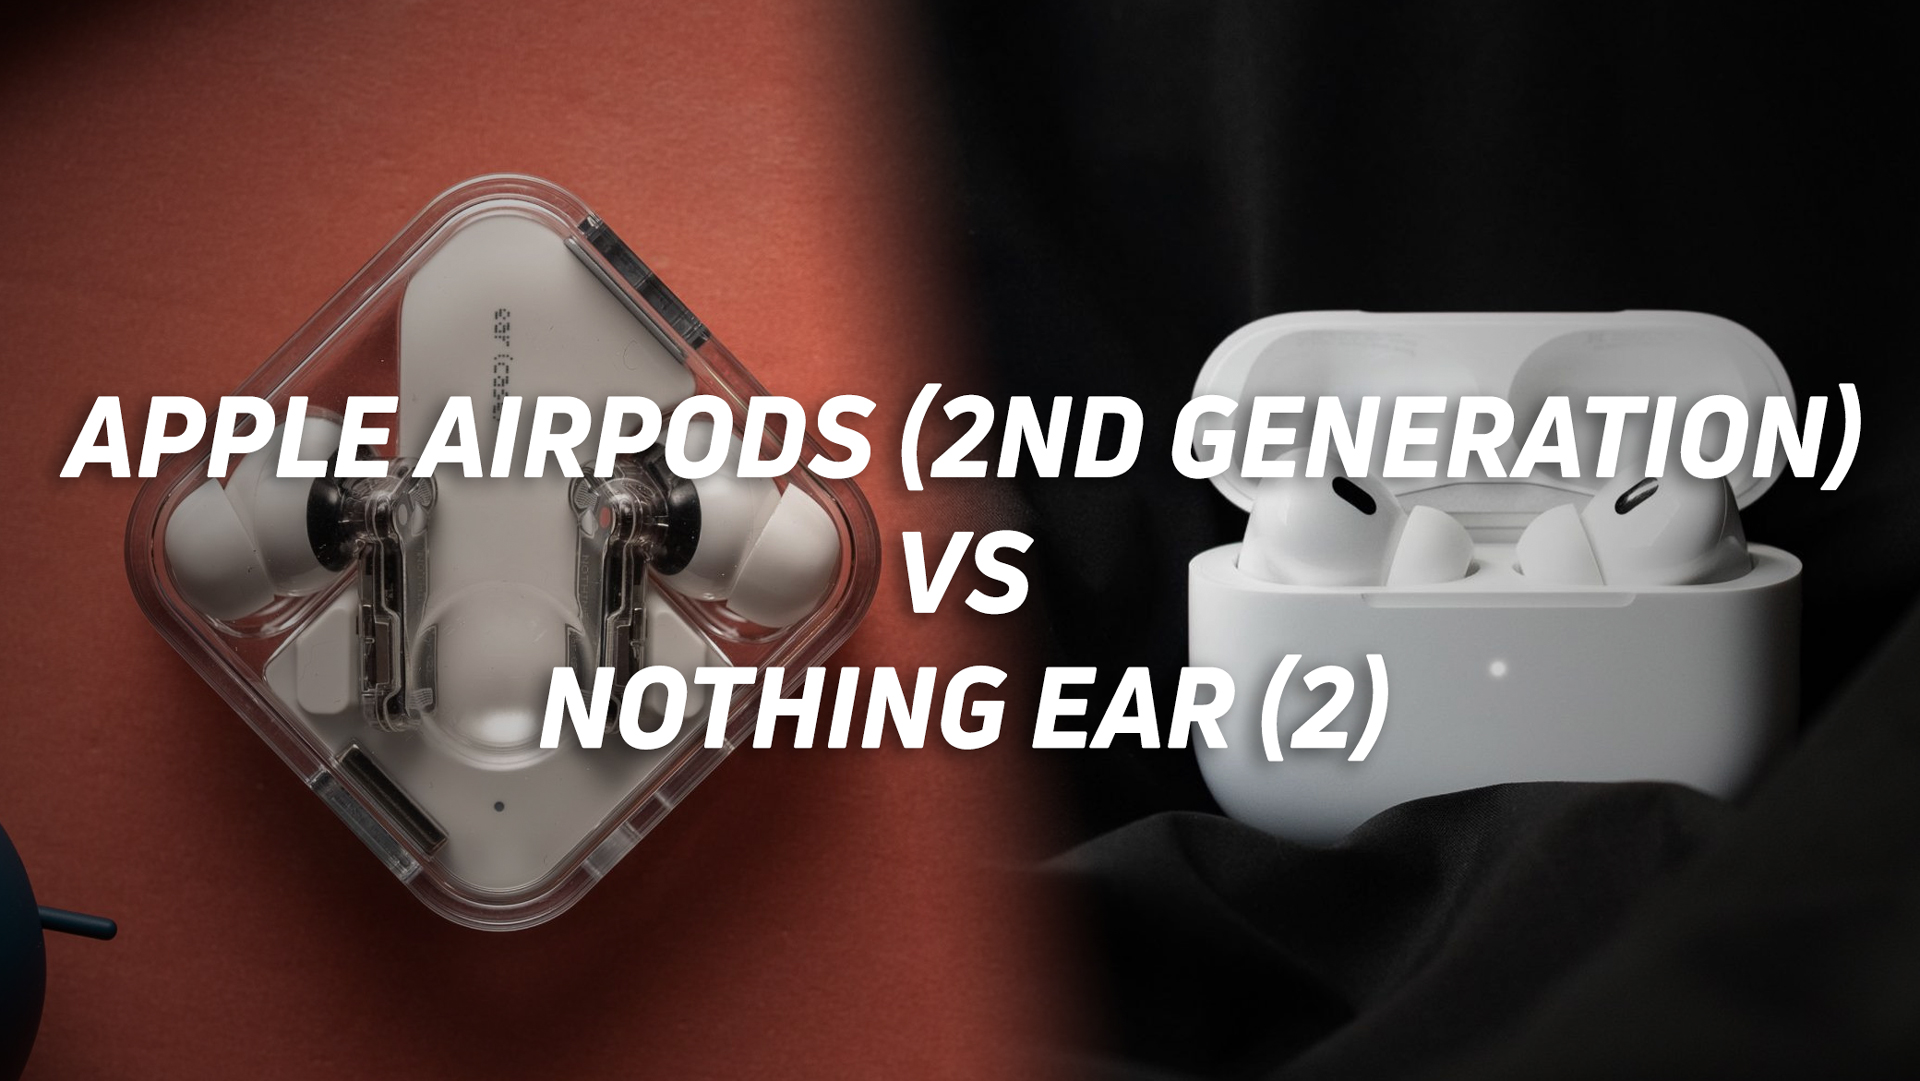 Apple AirPods Pro (2nd generation) vs Nothing Ear (2) - SoundGuys